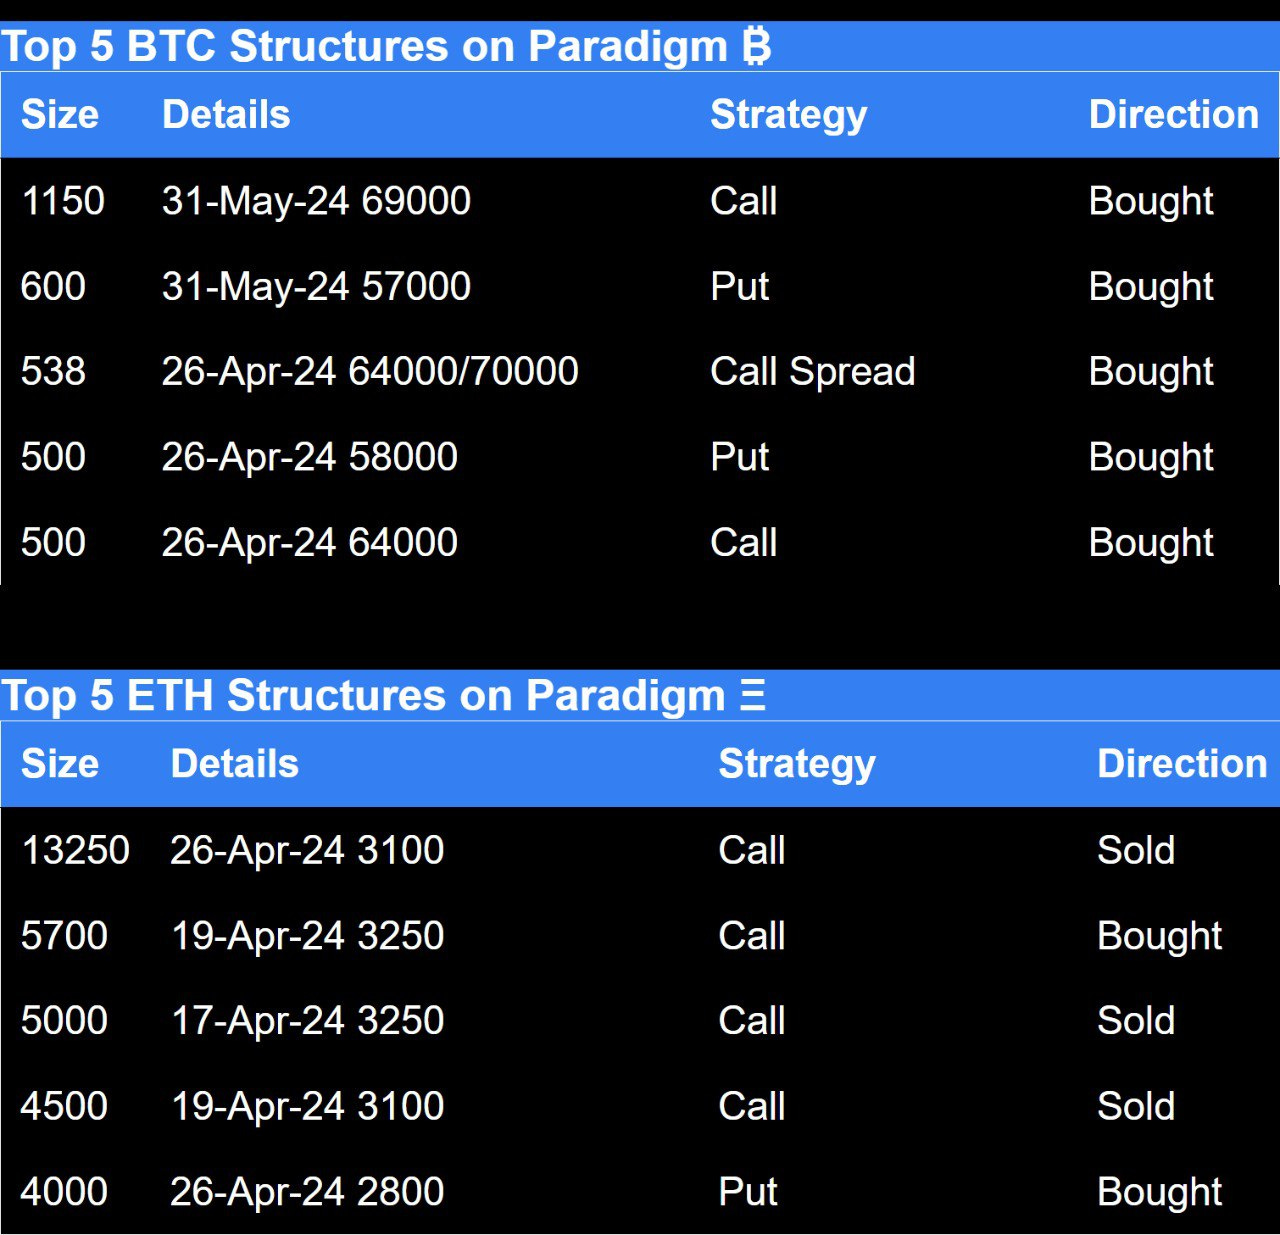 Top 5 BTC structures and top 5 ETH structures on Paradigm